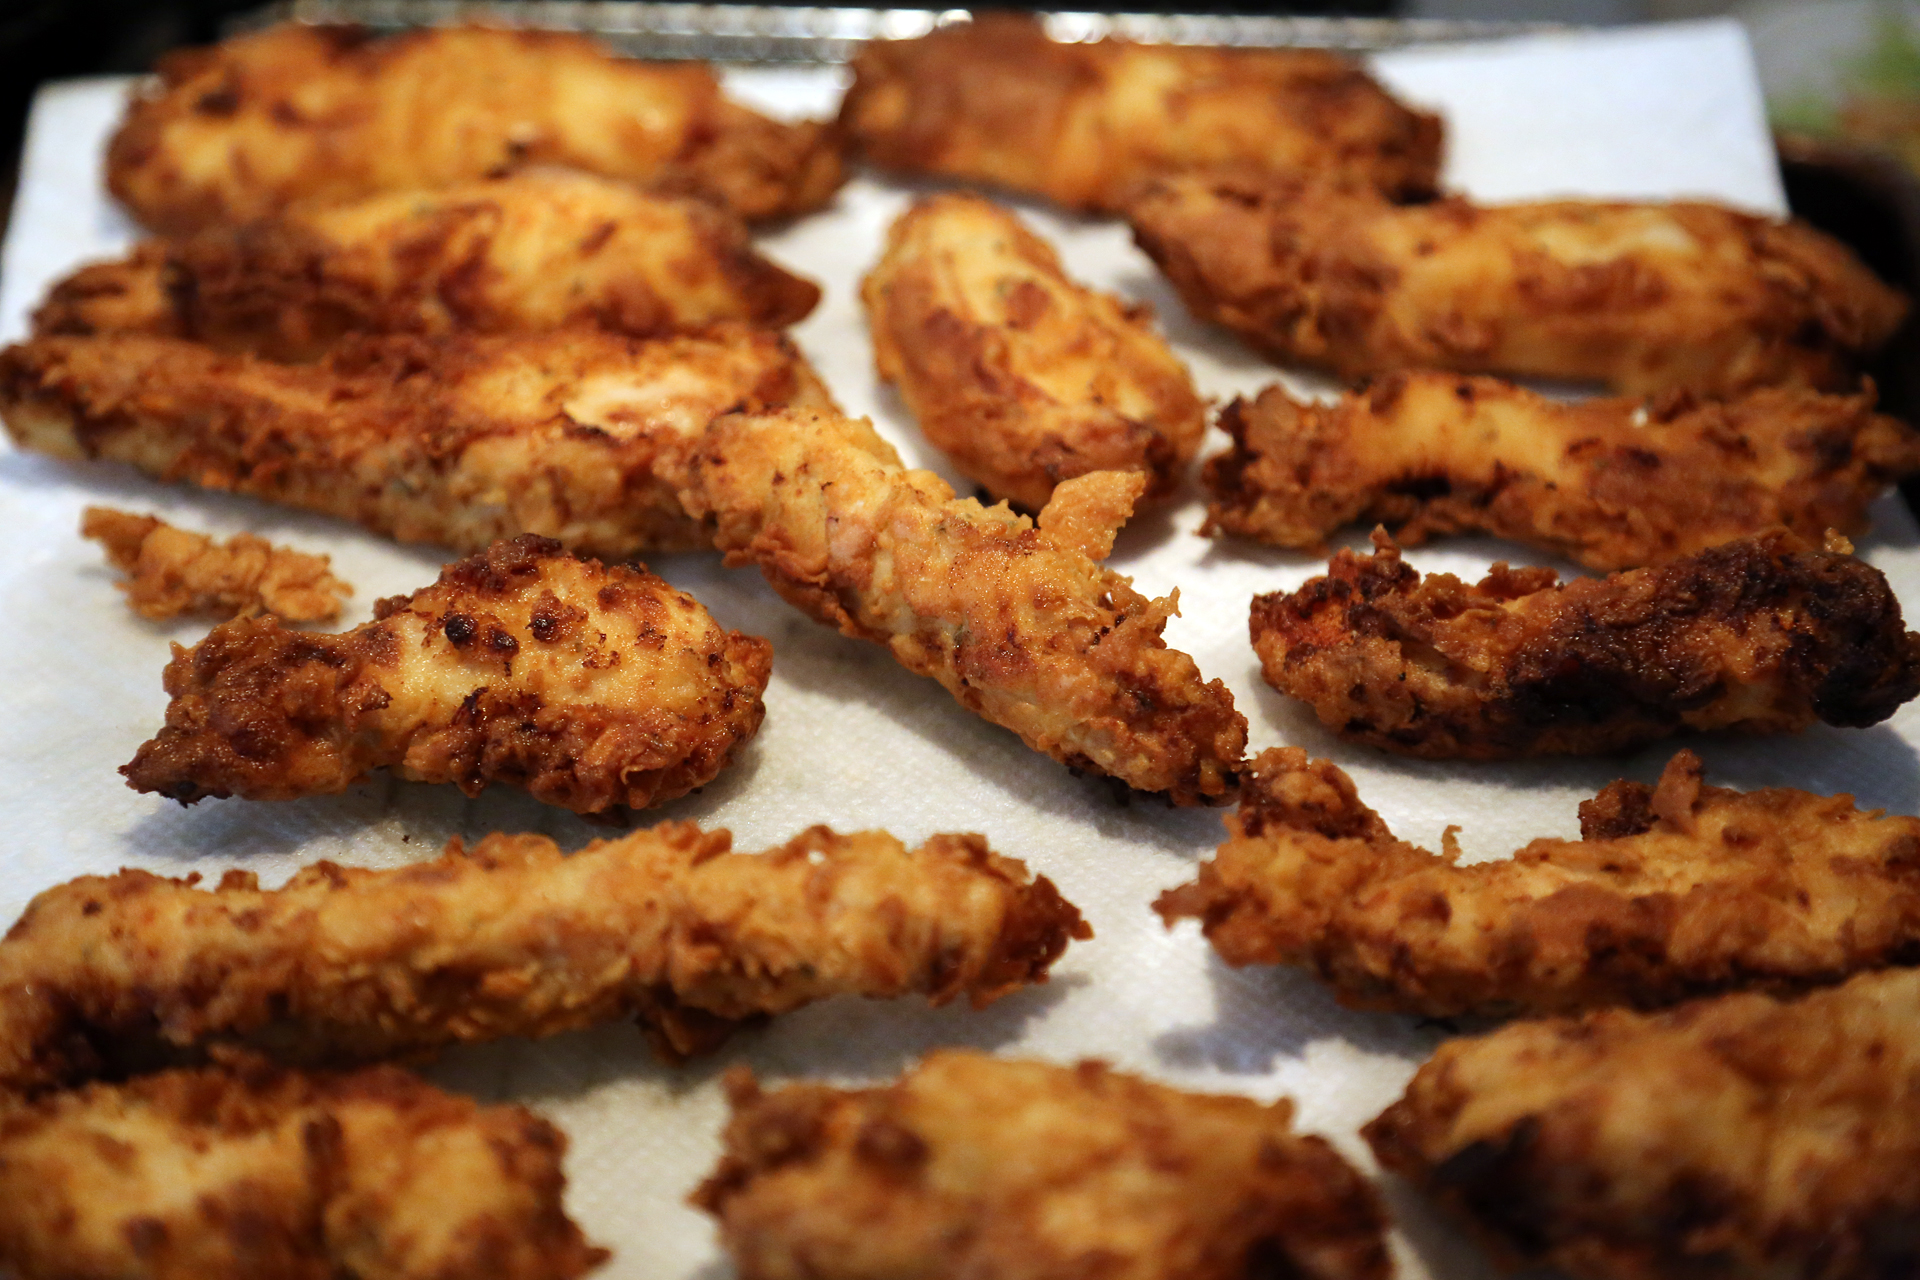 Transfer to the rack in the oven to keep warm while you finish frying the remaining chicken fingers.